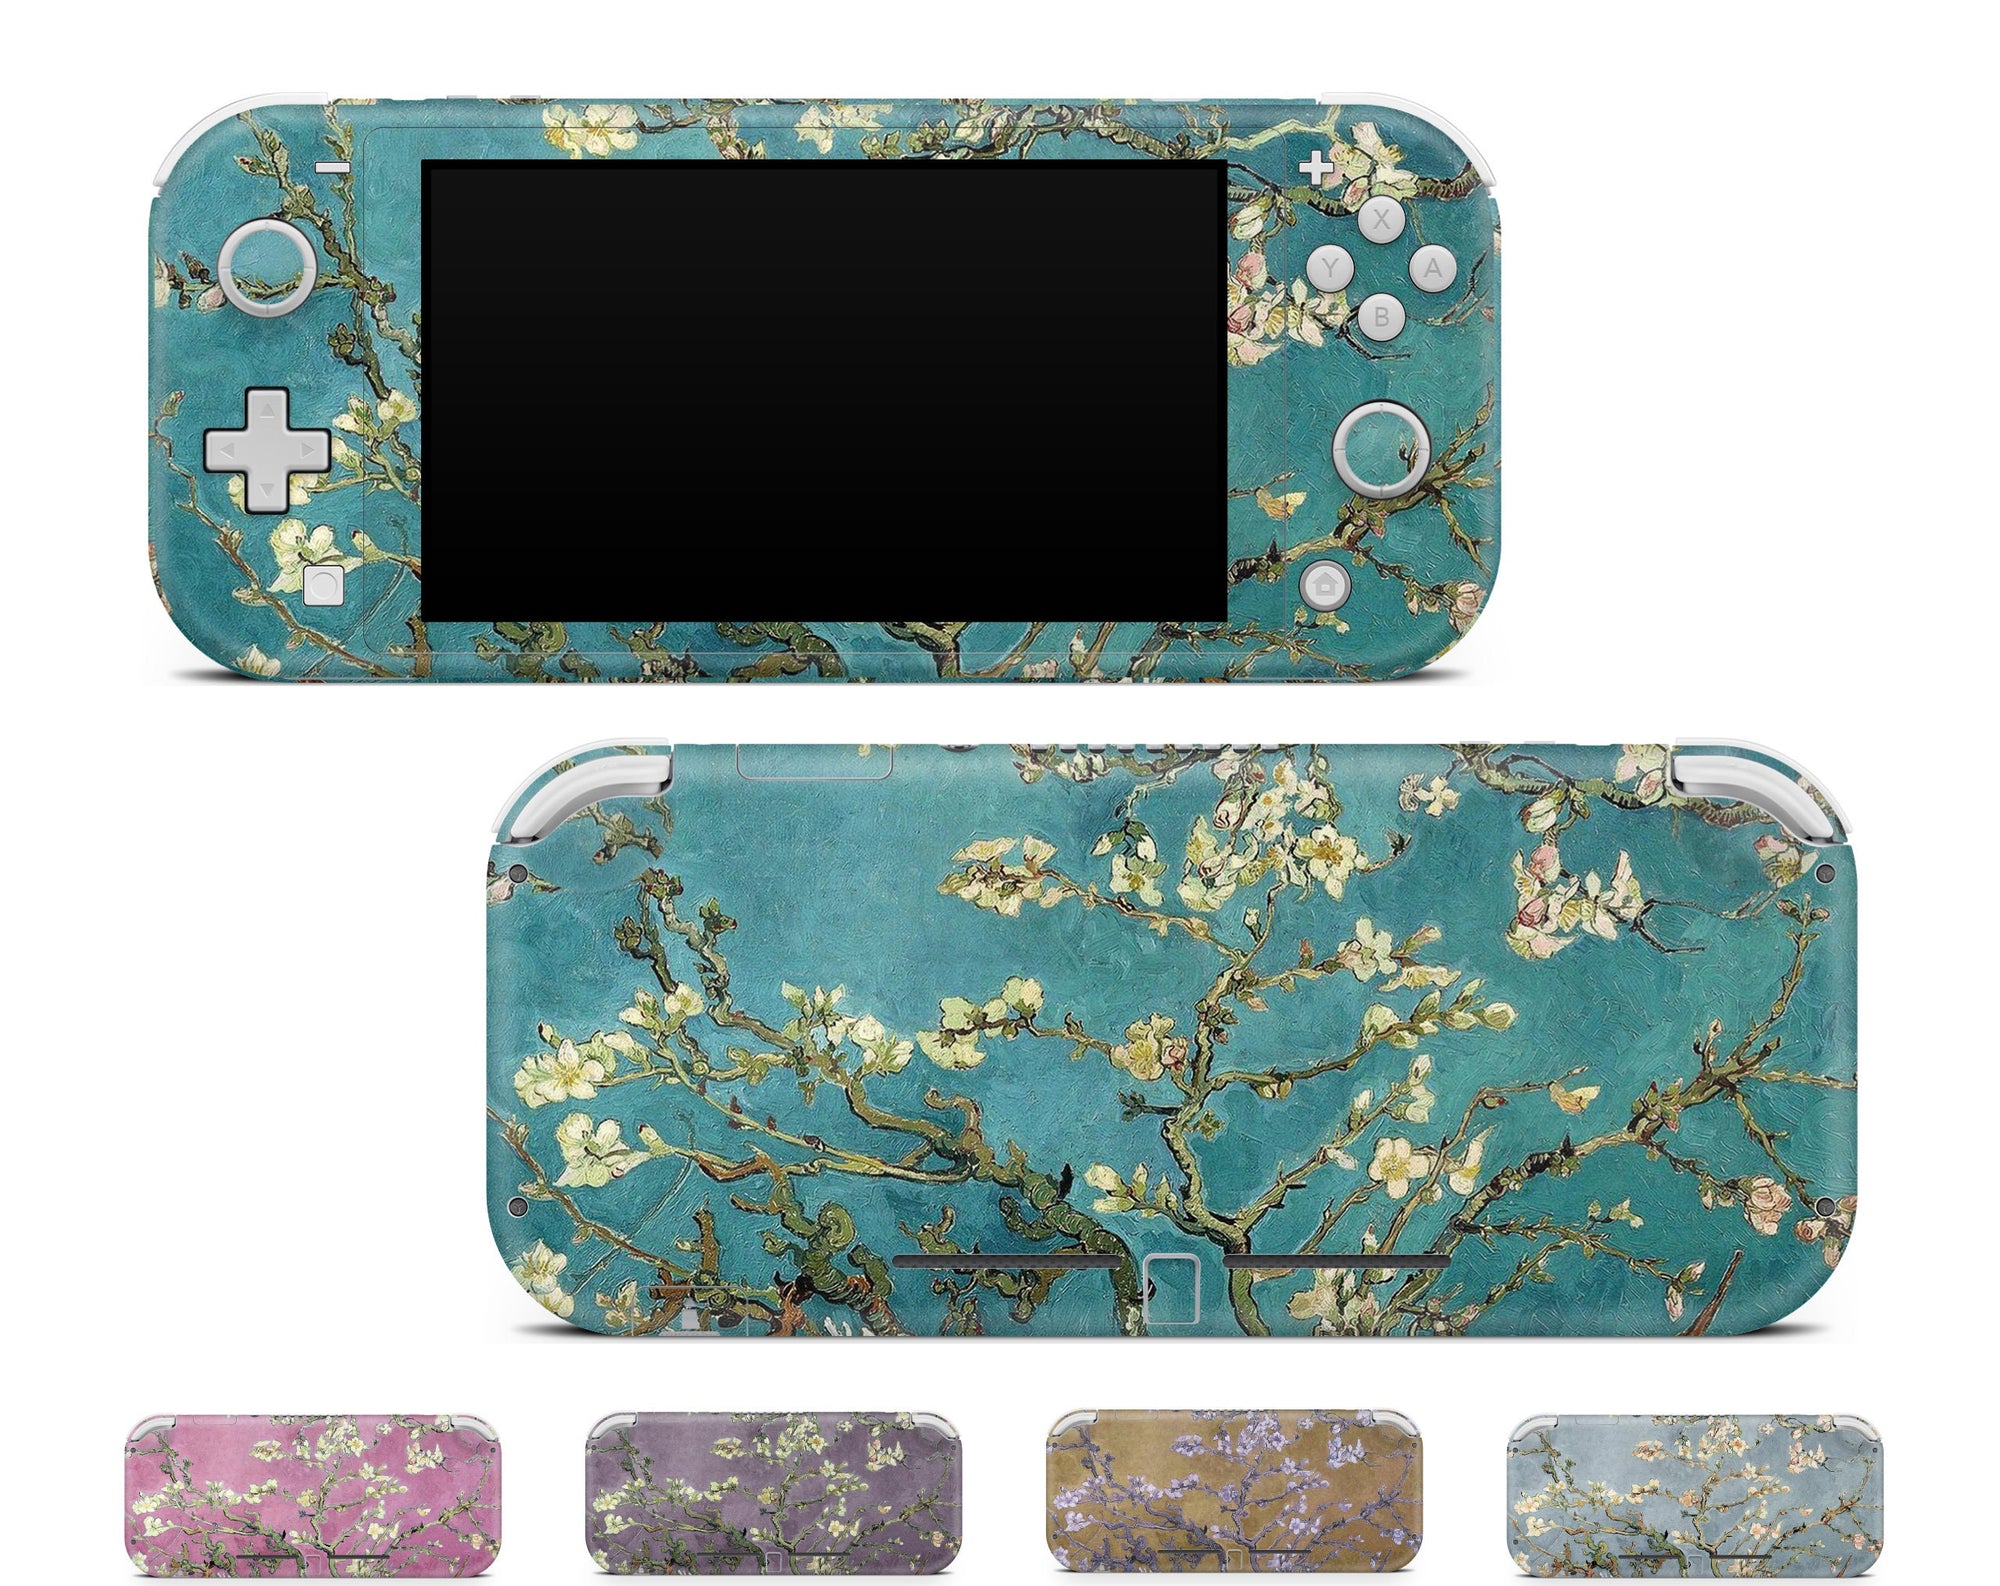 Nintendo switch Lite skin Almond Blossoms By Van Gogh, more color switch lite skin Full cover 3m